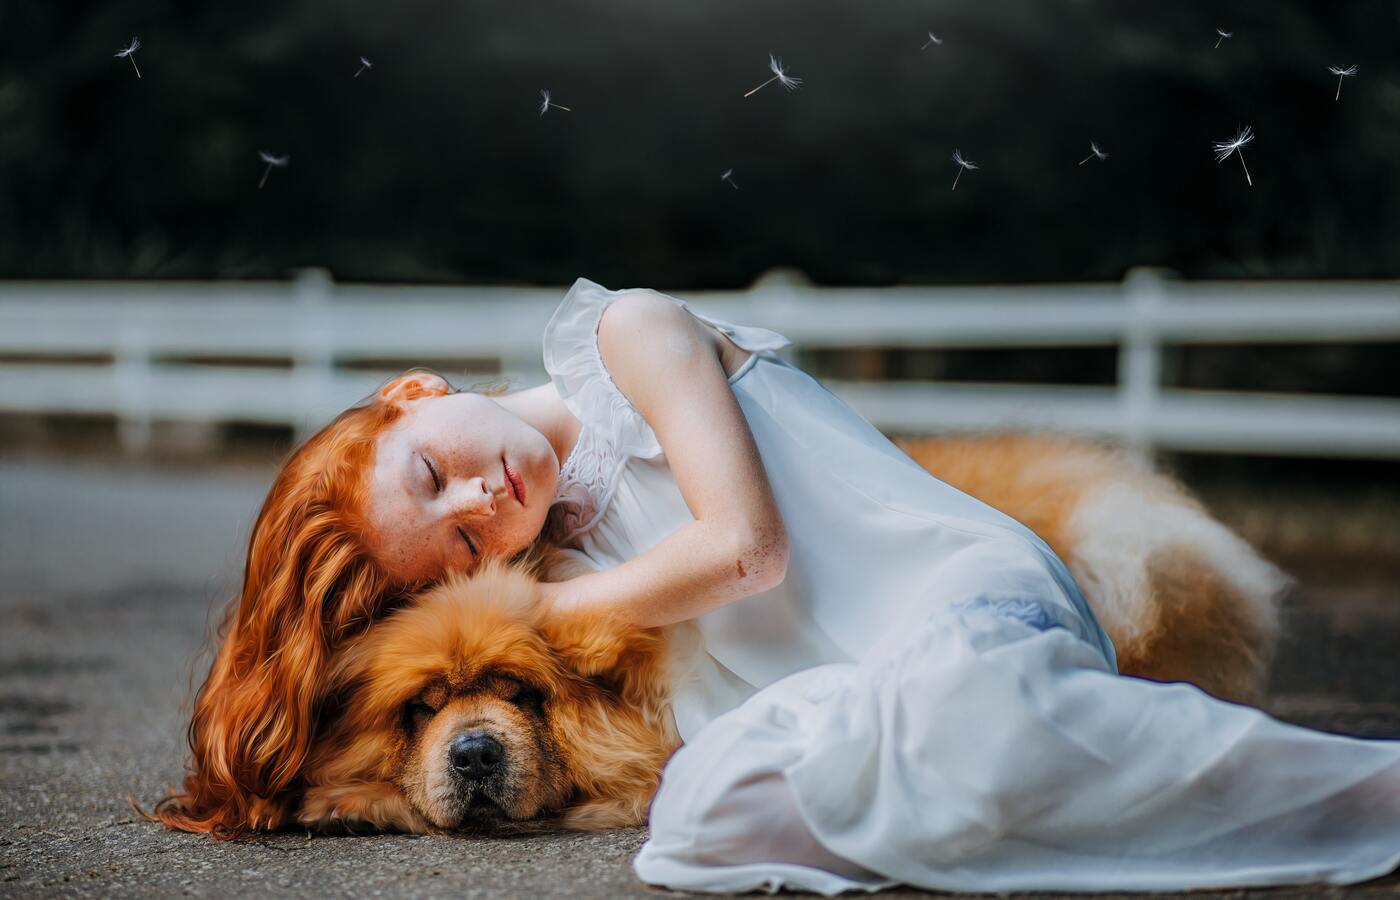 Girl And Dog Sleeping 5k Wallpaper In 1400x900 Resolution